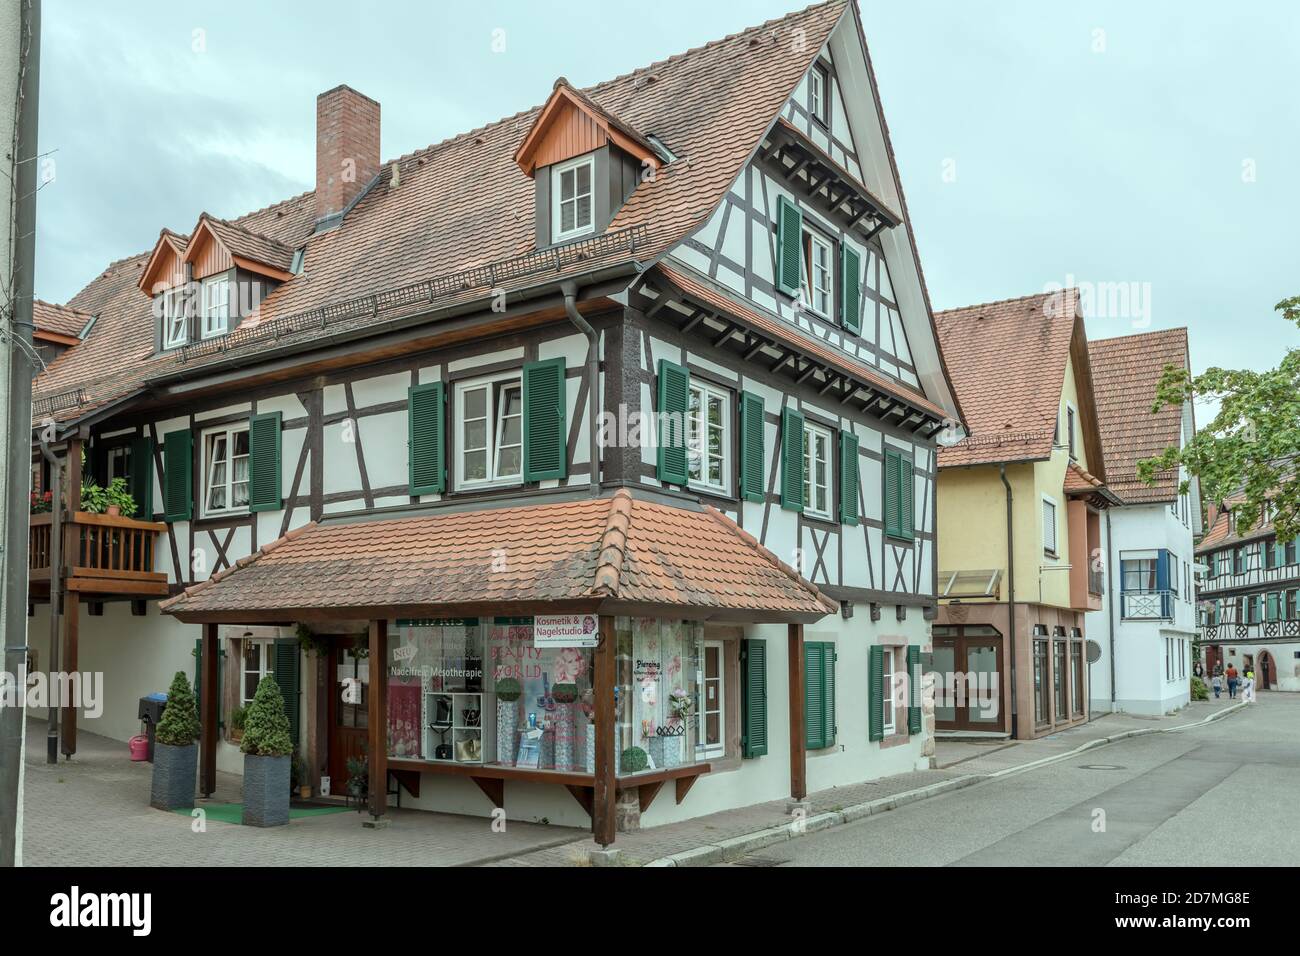 OBERKIRCH, GERMANY - September 06 2020: cityscape with wattle  picturesque old house at pedestrian precinct in historical little town, shot on septemb Stock Photo